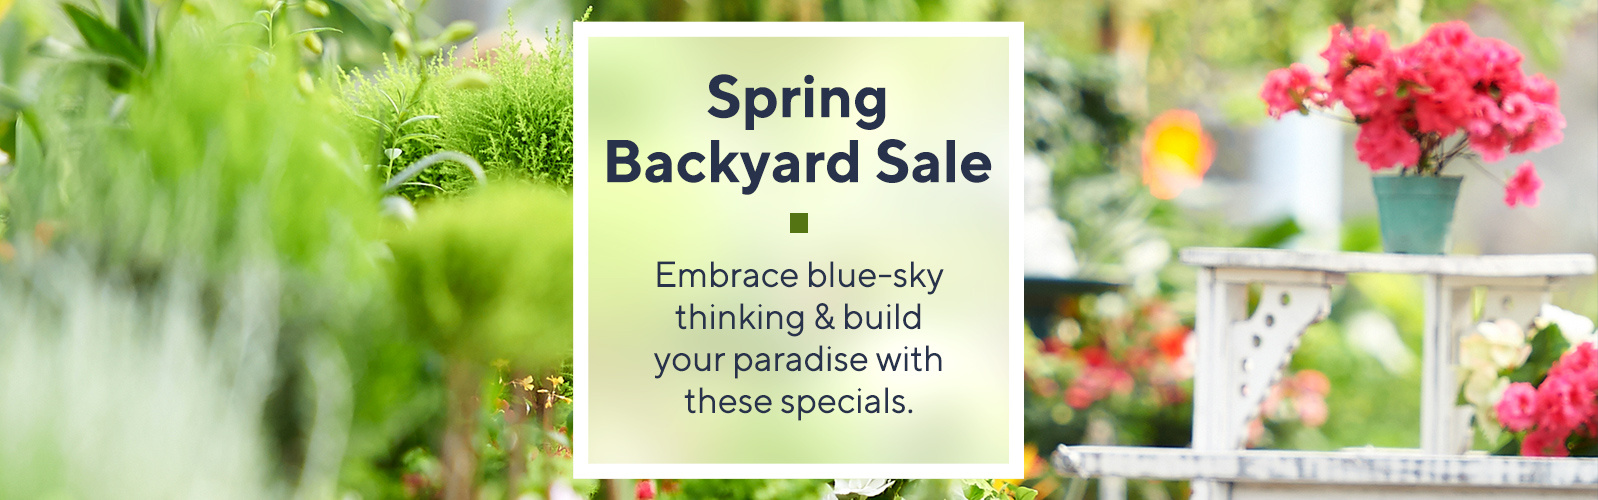 Spring Backyard Sale  Embrace blue-sky thinking & build your paradise with these specials.